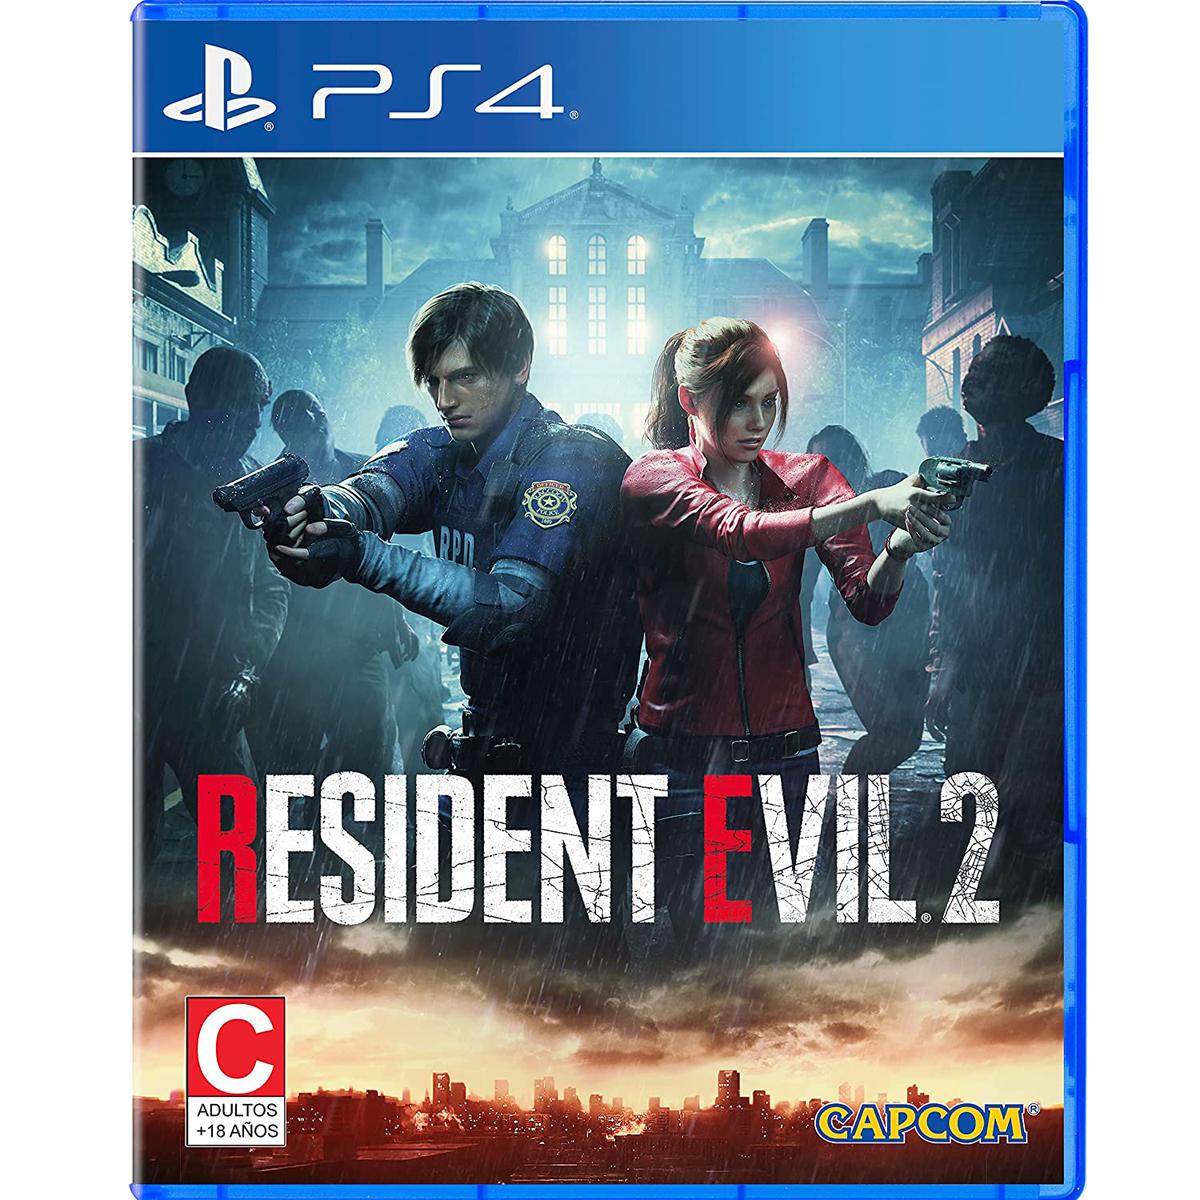 Resident Evil 2 PS4 or Xbox One for $12.99